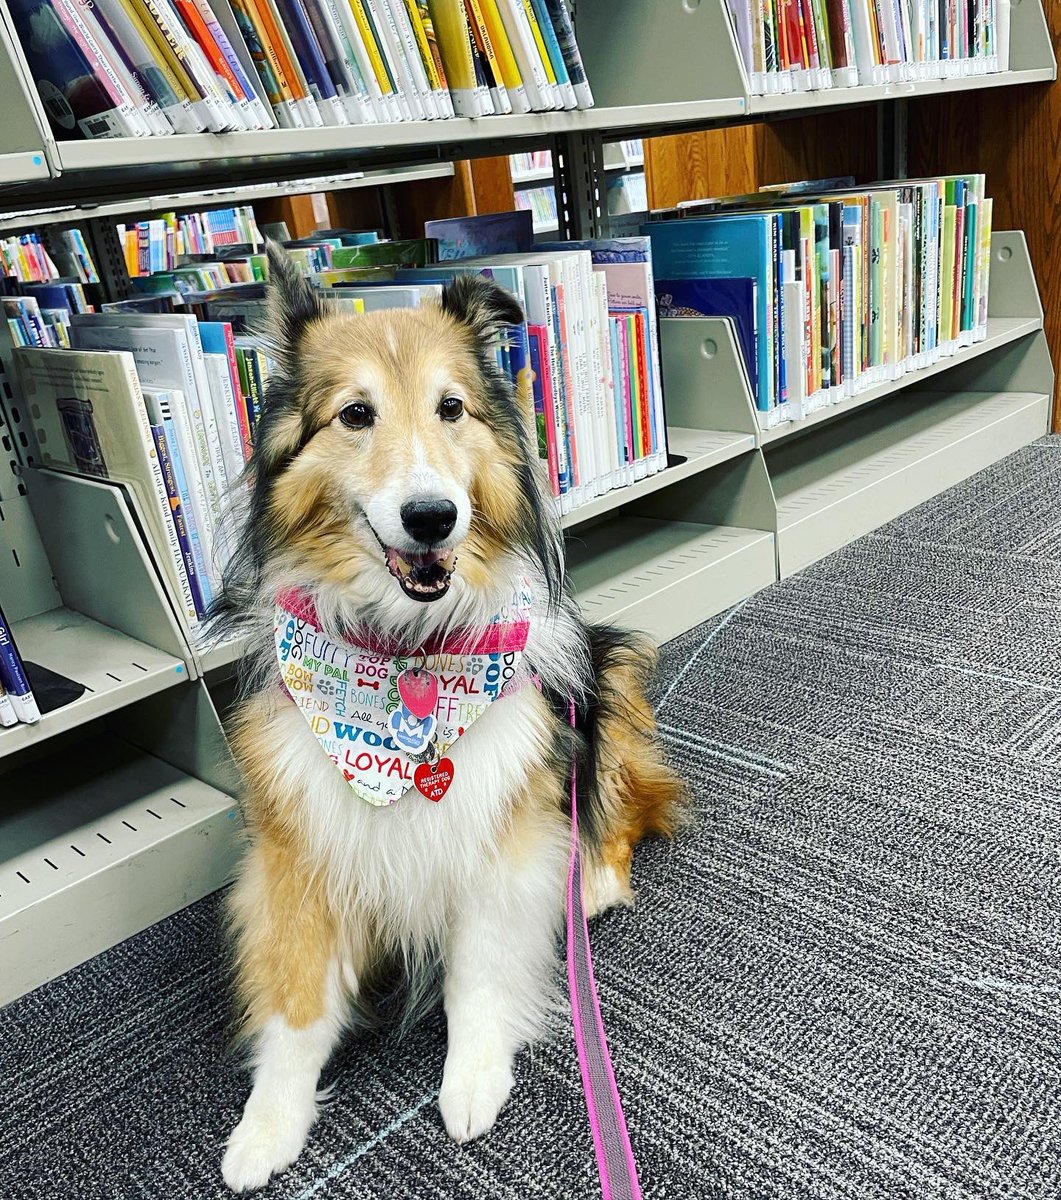 I bet you can guess what I was doing here! I was at the library for Children Reading to Dogs! Did you guess right? I love to visit the @MetroLibraryOK in The Village! 💙🐾💙 #mollygirltherapydog #BooksOfTheYear